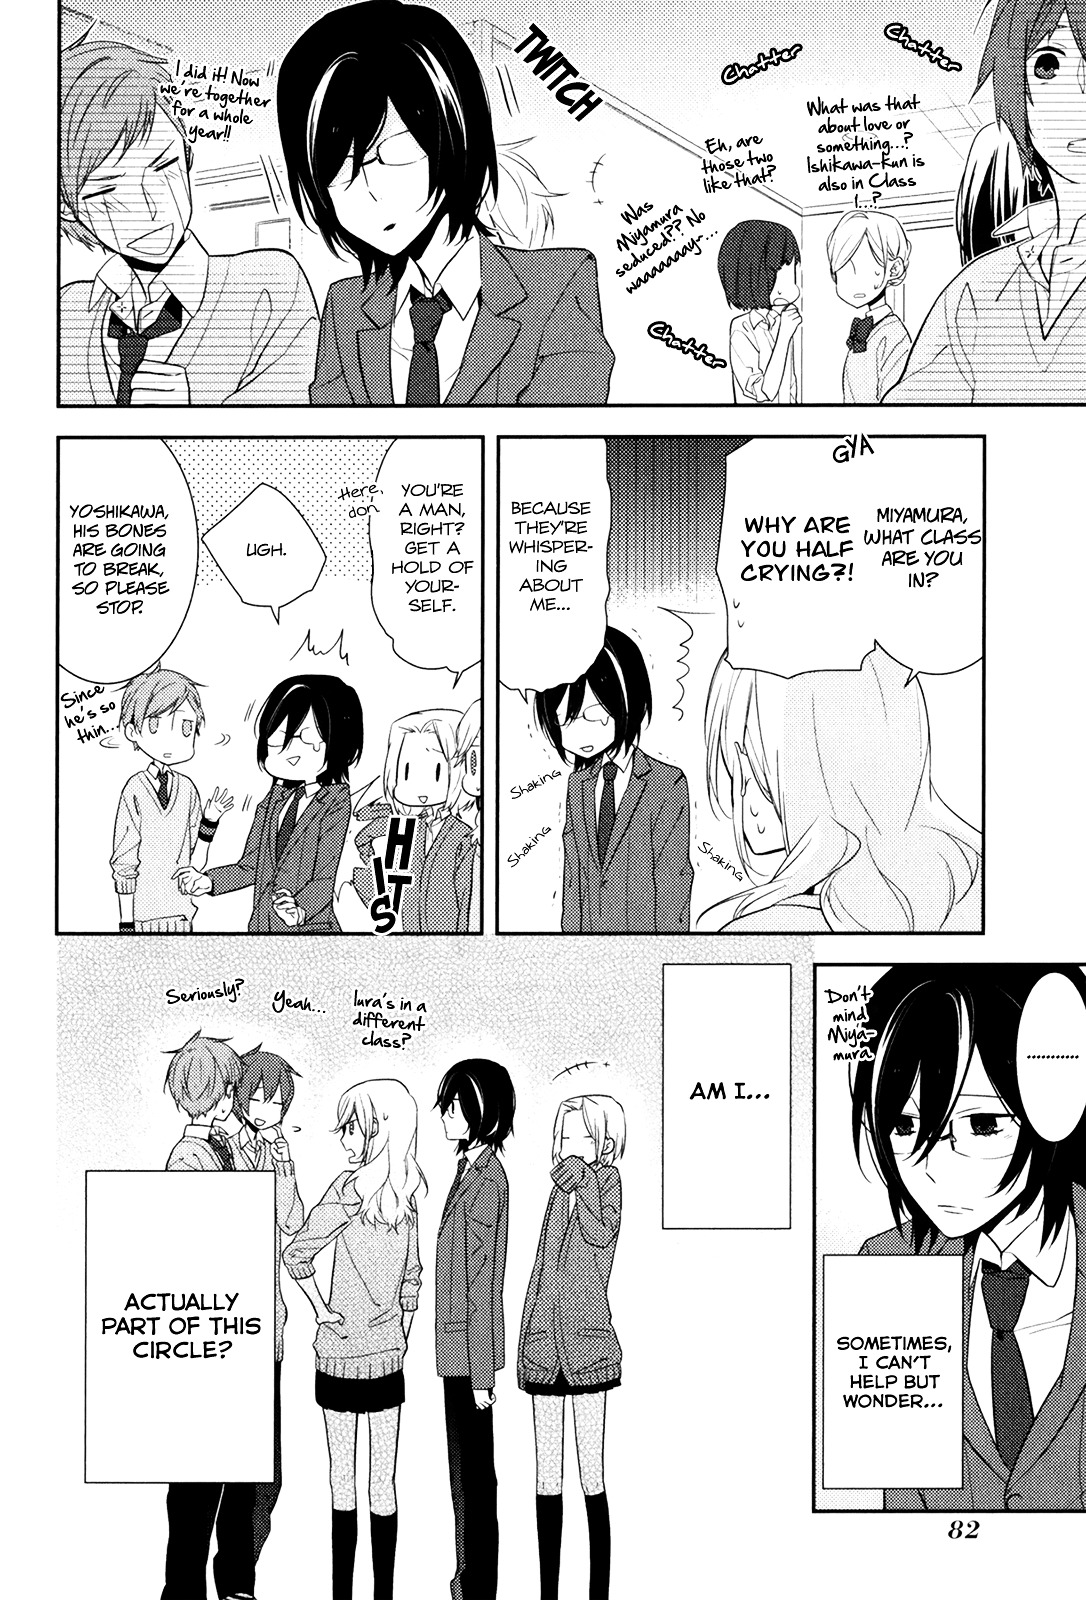 Horimiya Chapter 10 : Page 10 - Picture 3